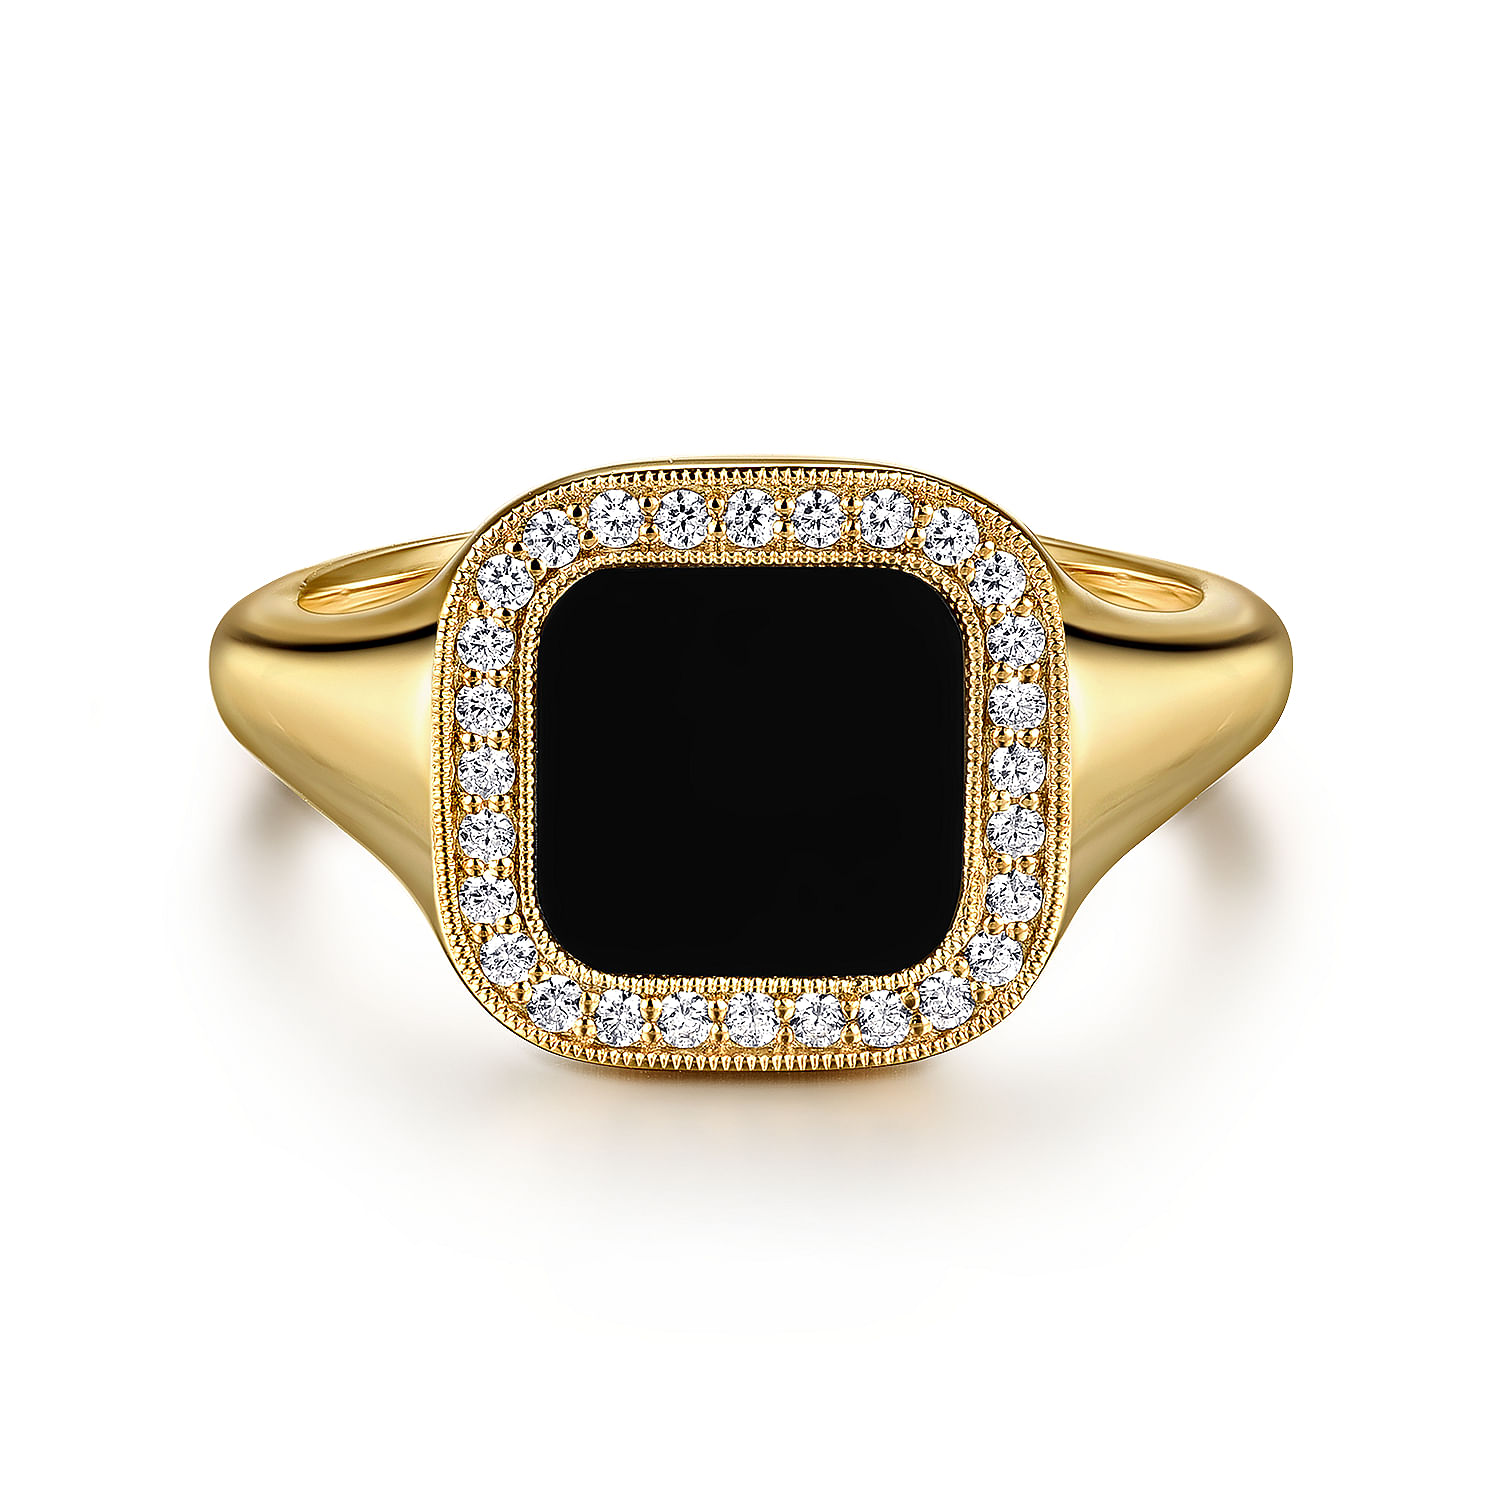 14K Yellow Gold Diamond and Onyx Mens Ring in High Polished Finish